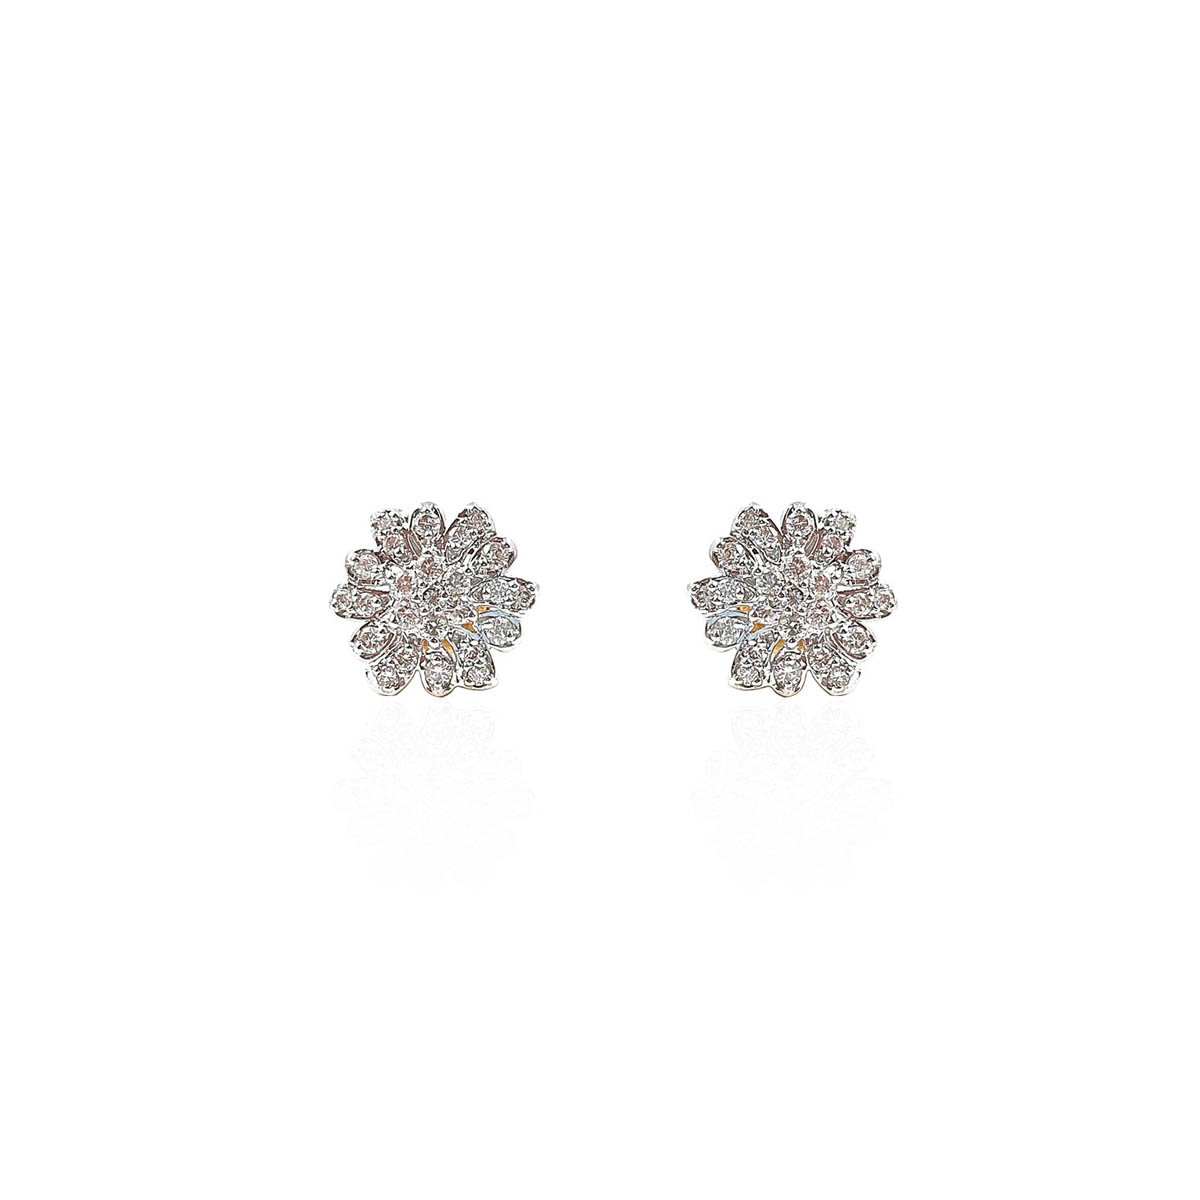 Bella White Crystal Drop Earrings Stud Earrings Elegant Austrian Fashion  Jewelry For Women, Perfect For Weddings And Office Wear Silver Color Great  Gift Idea From Uxtz, $9.66 | DHgate.Com